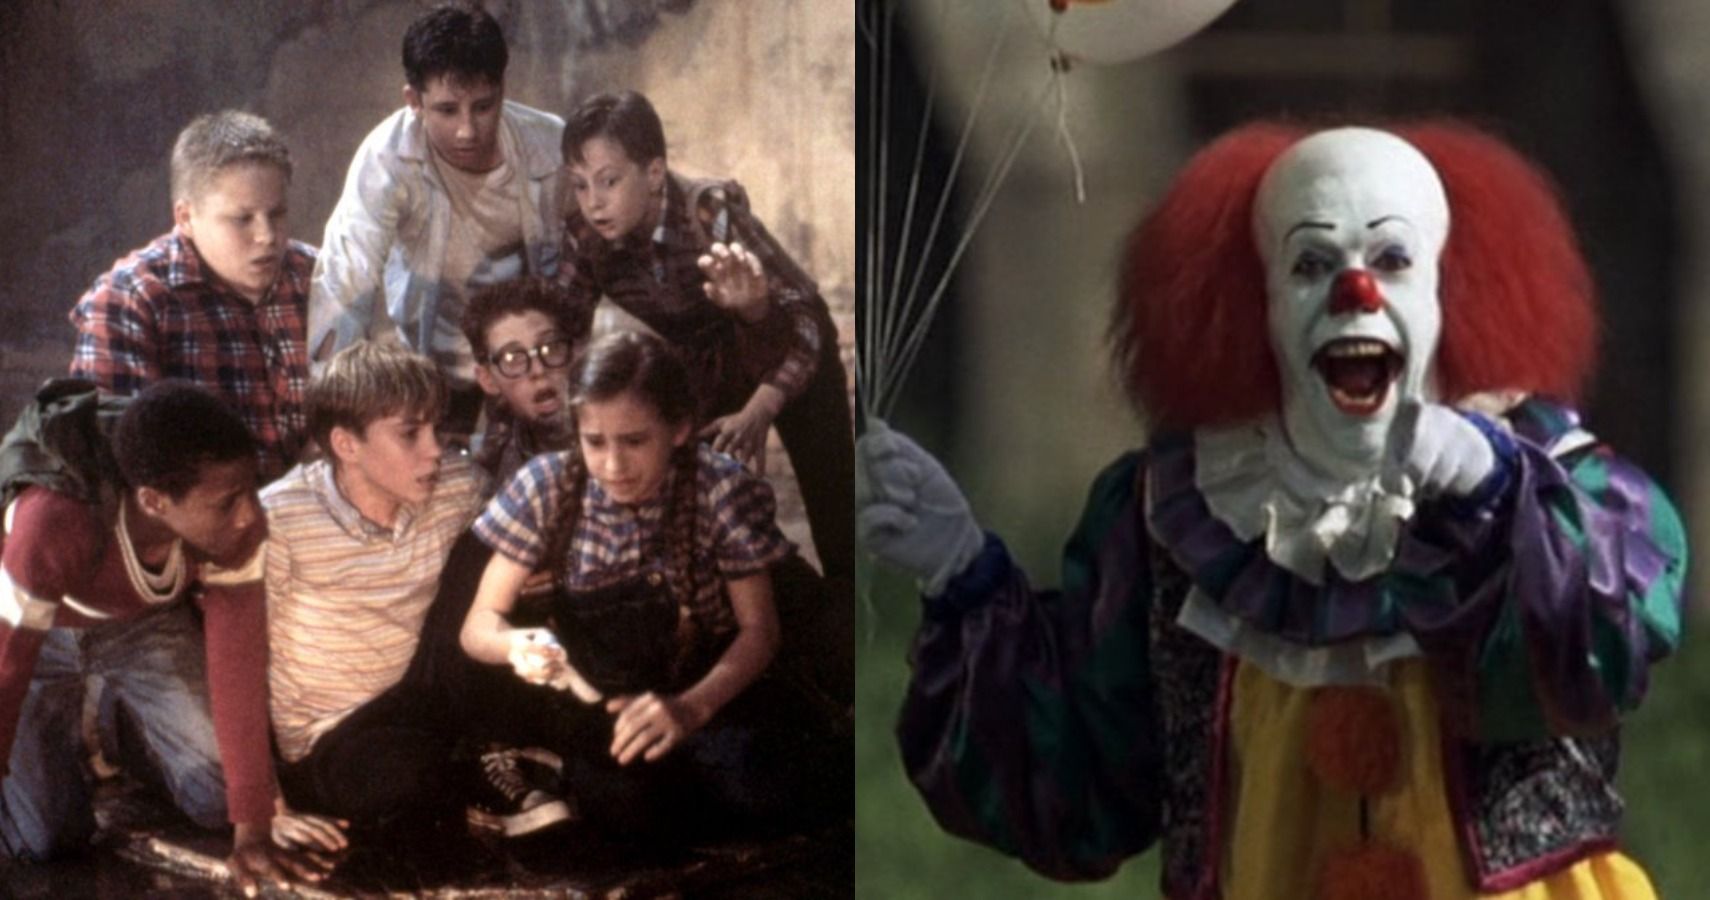 two pictures: one of the Losers Club and one of Pennywise